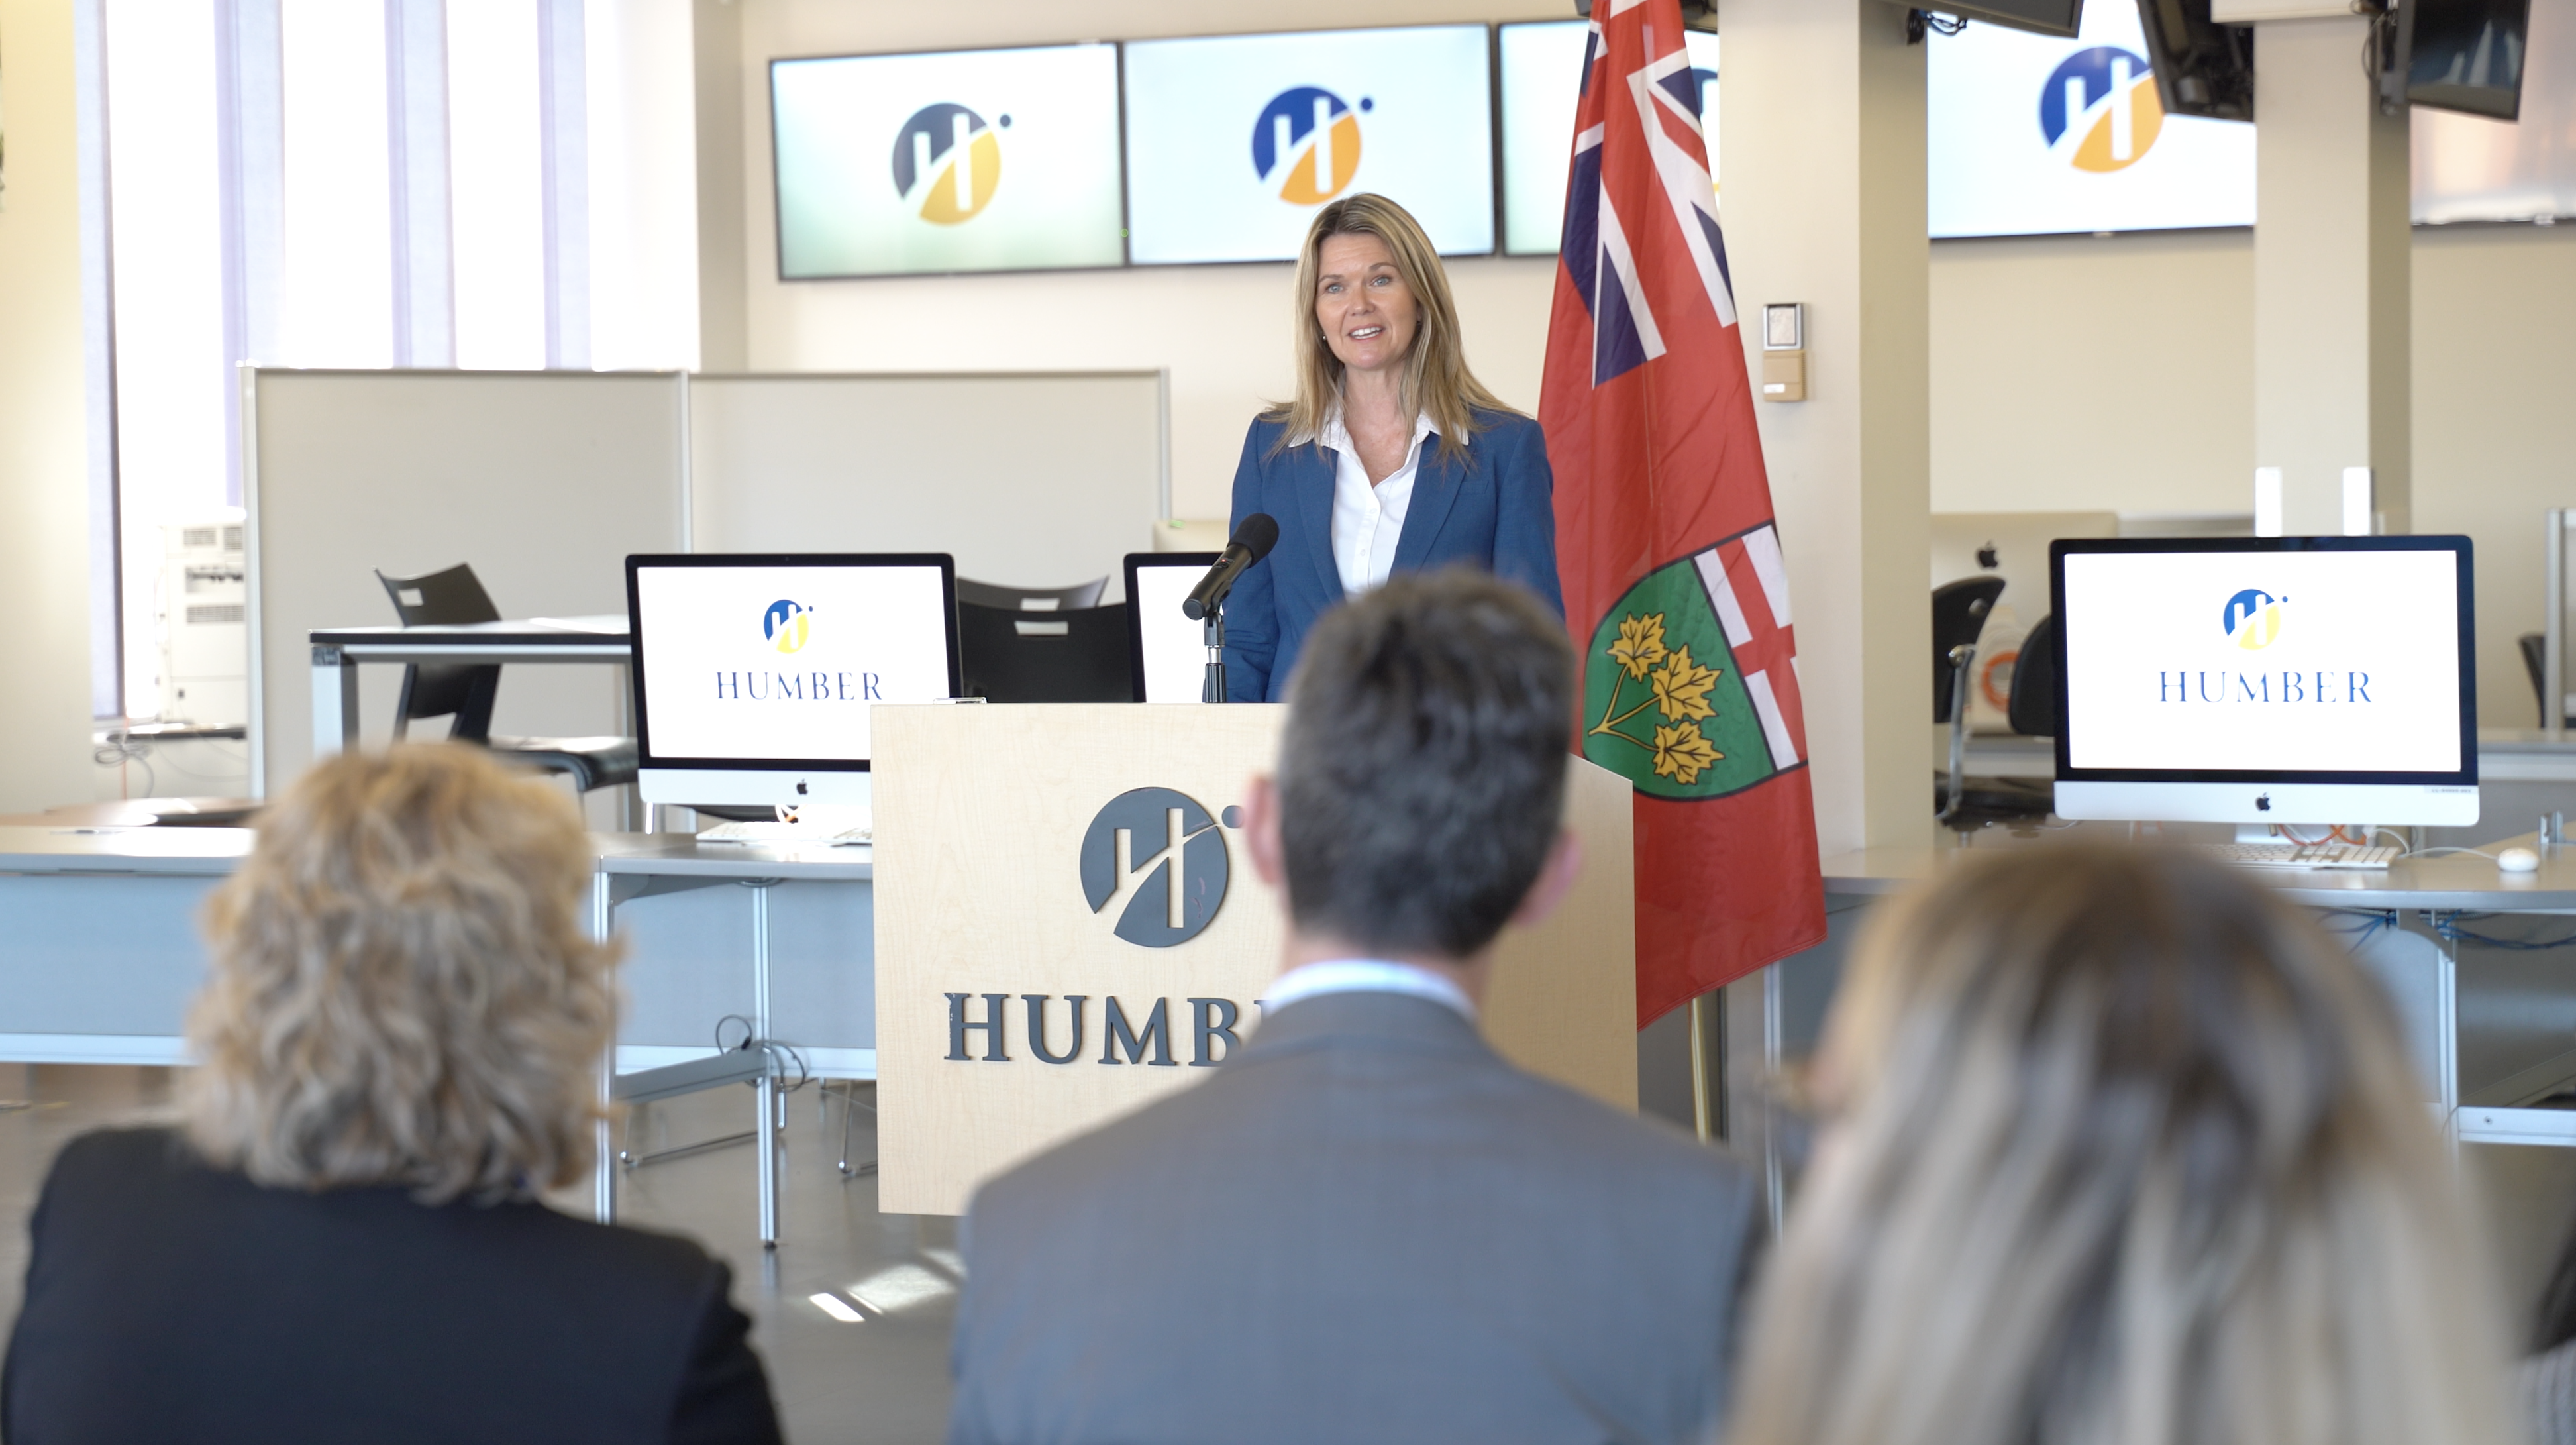 Ontario’s Minister of Colleges and Universities Jill Dunlop stands at a podium with the Humber College logo on it.